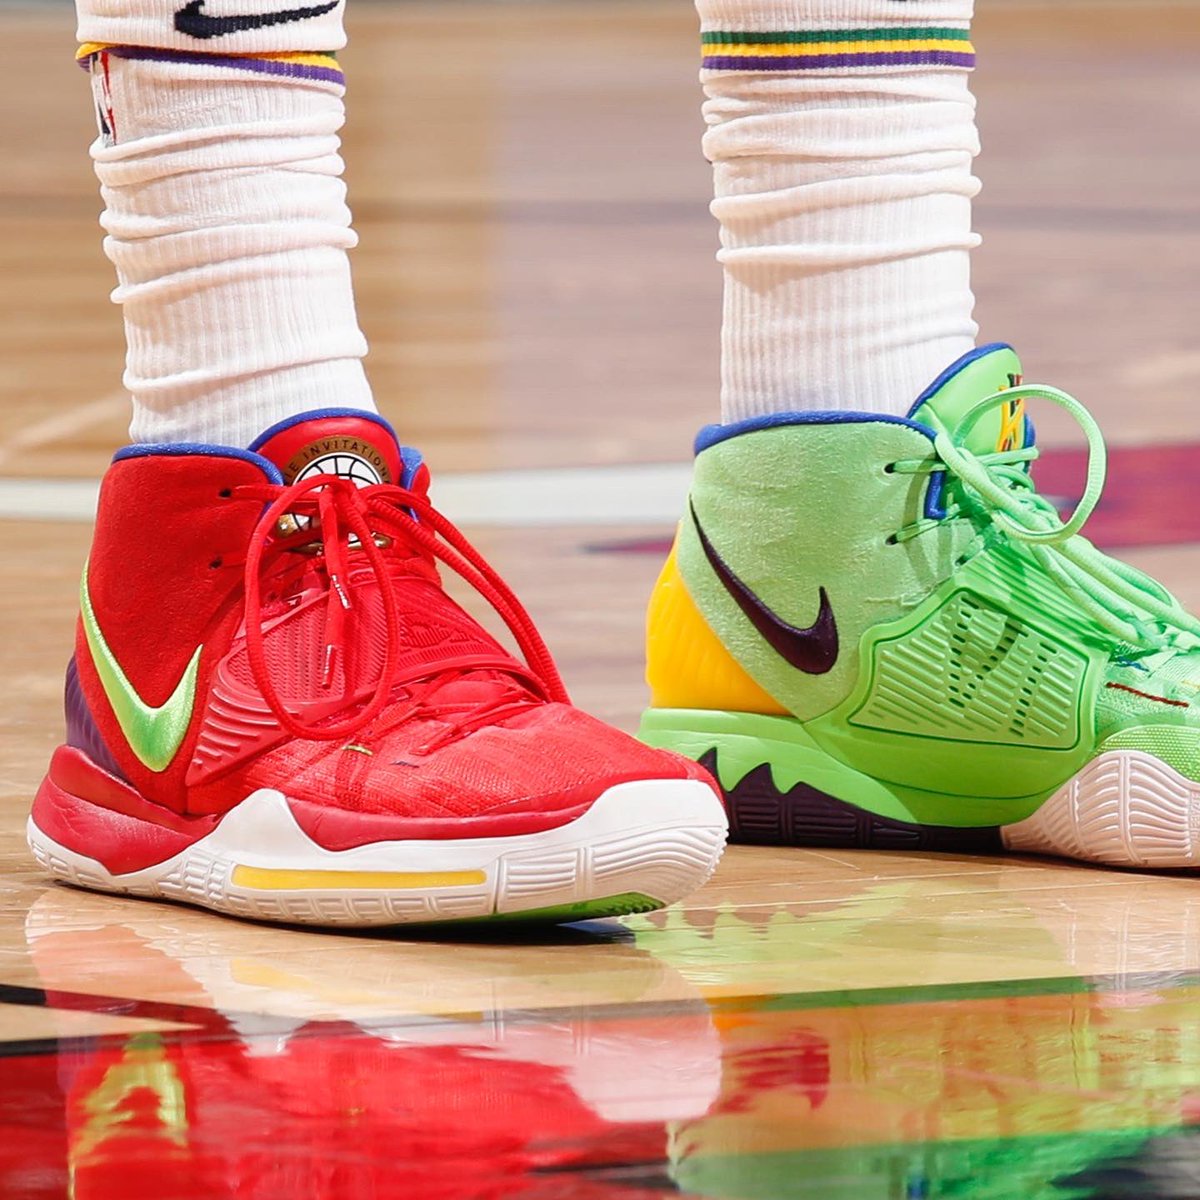 kyrie invitational shoes